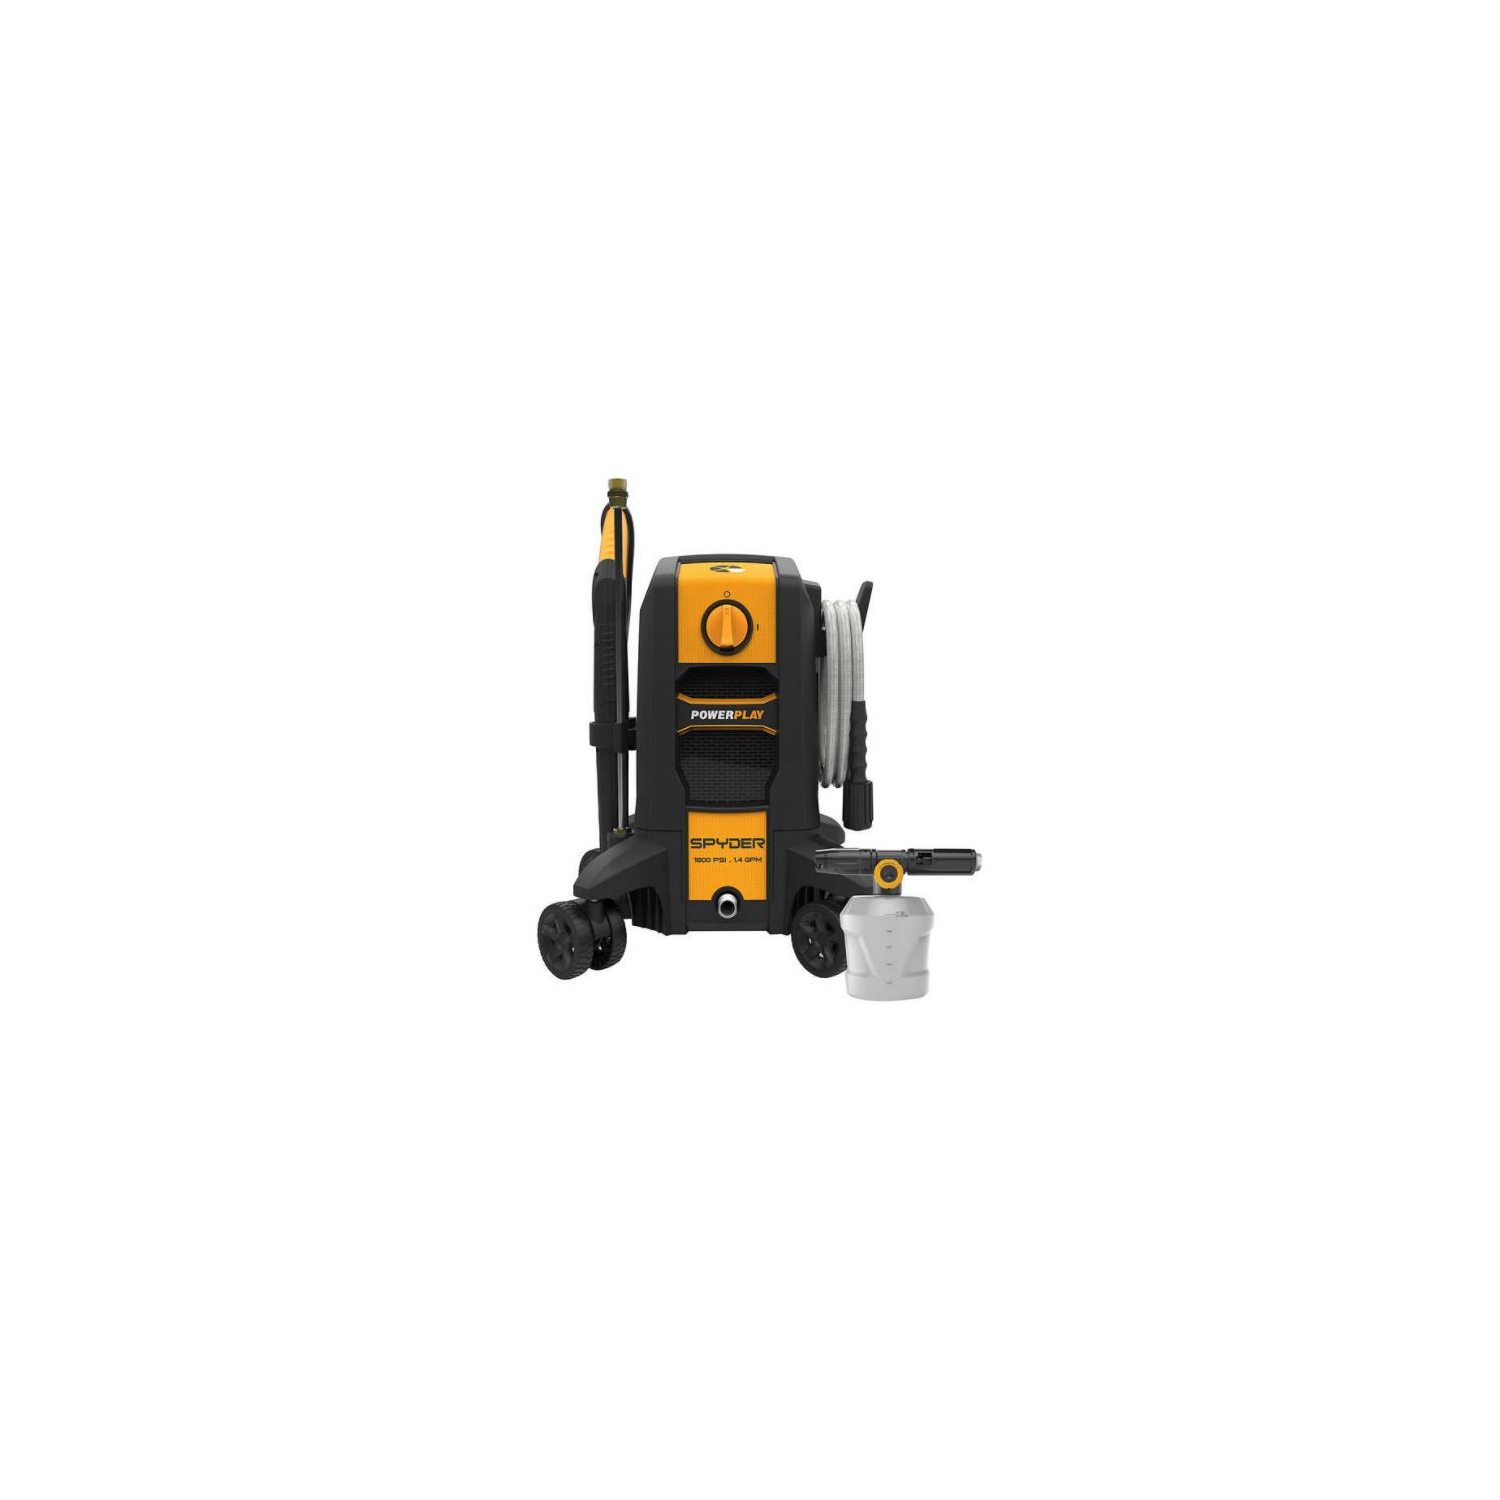 PSI Electric Pressure Washer .Powerplay Spyder 1800 PSI Electric Pressure Washer with 4-wheel Steering and Foam Cannon